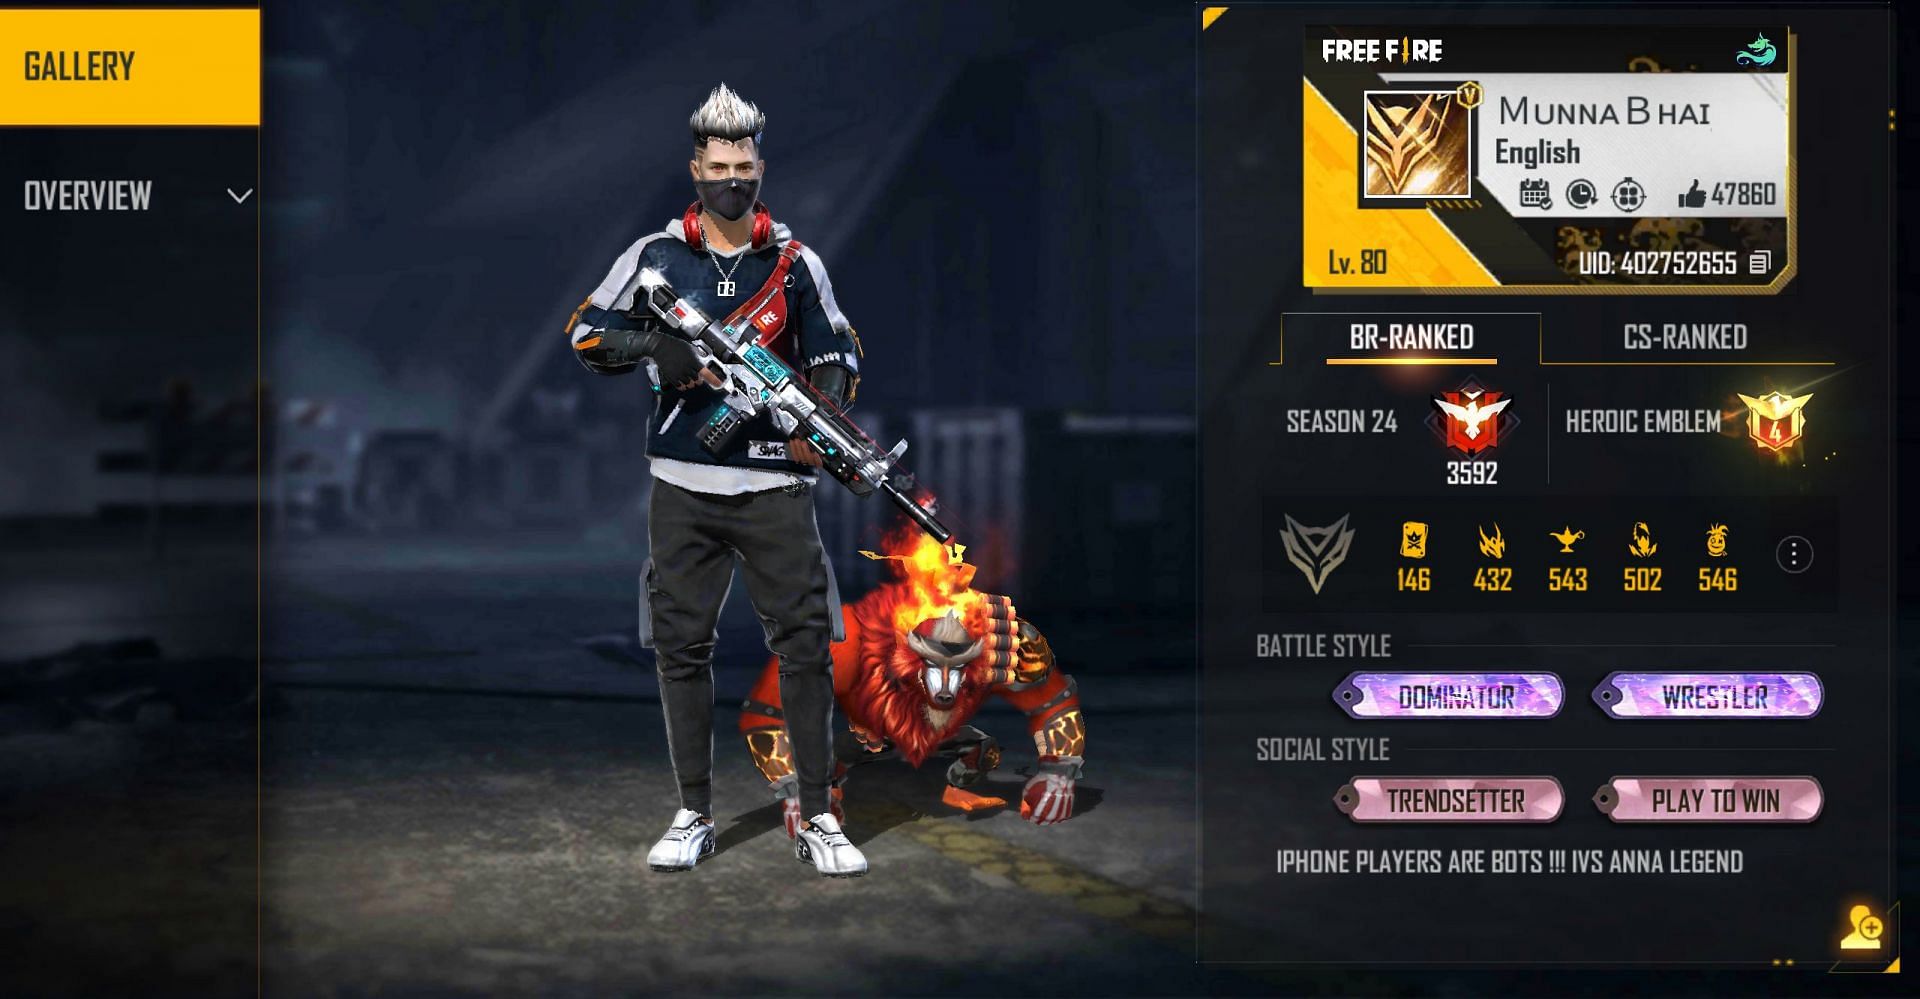 This is Munna Bhai Gaming&#039;s ID in Free Fire (Image via Free Fire)